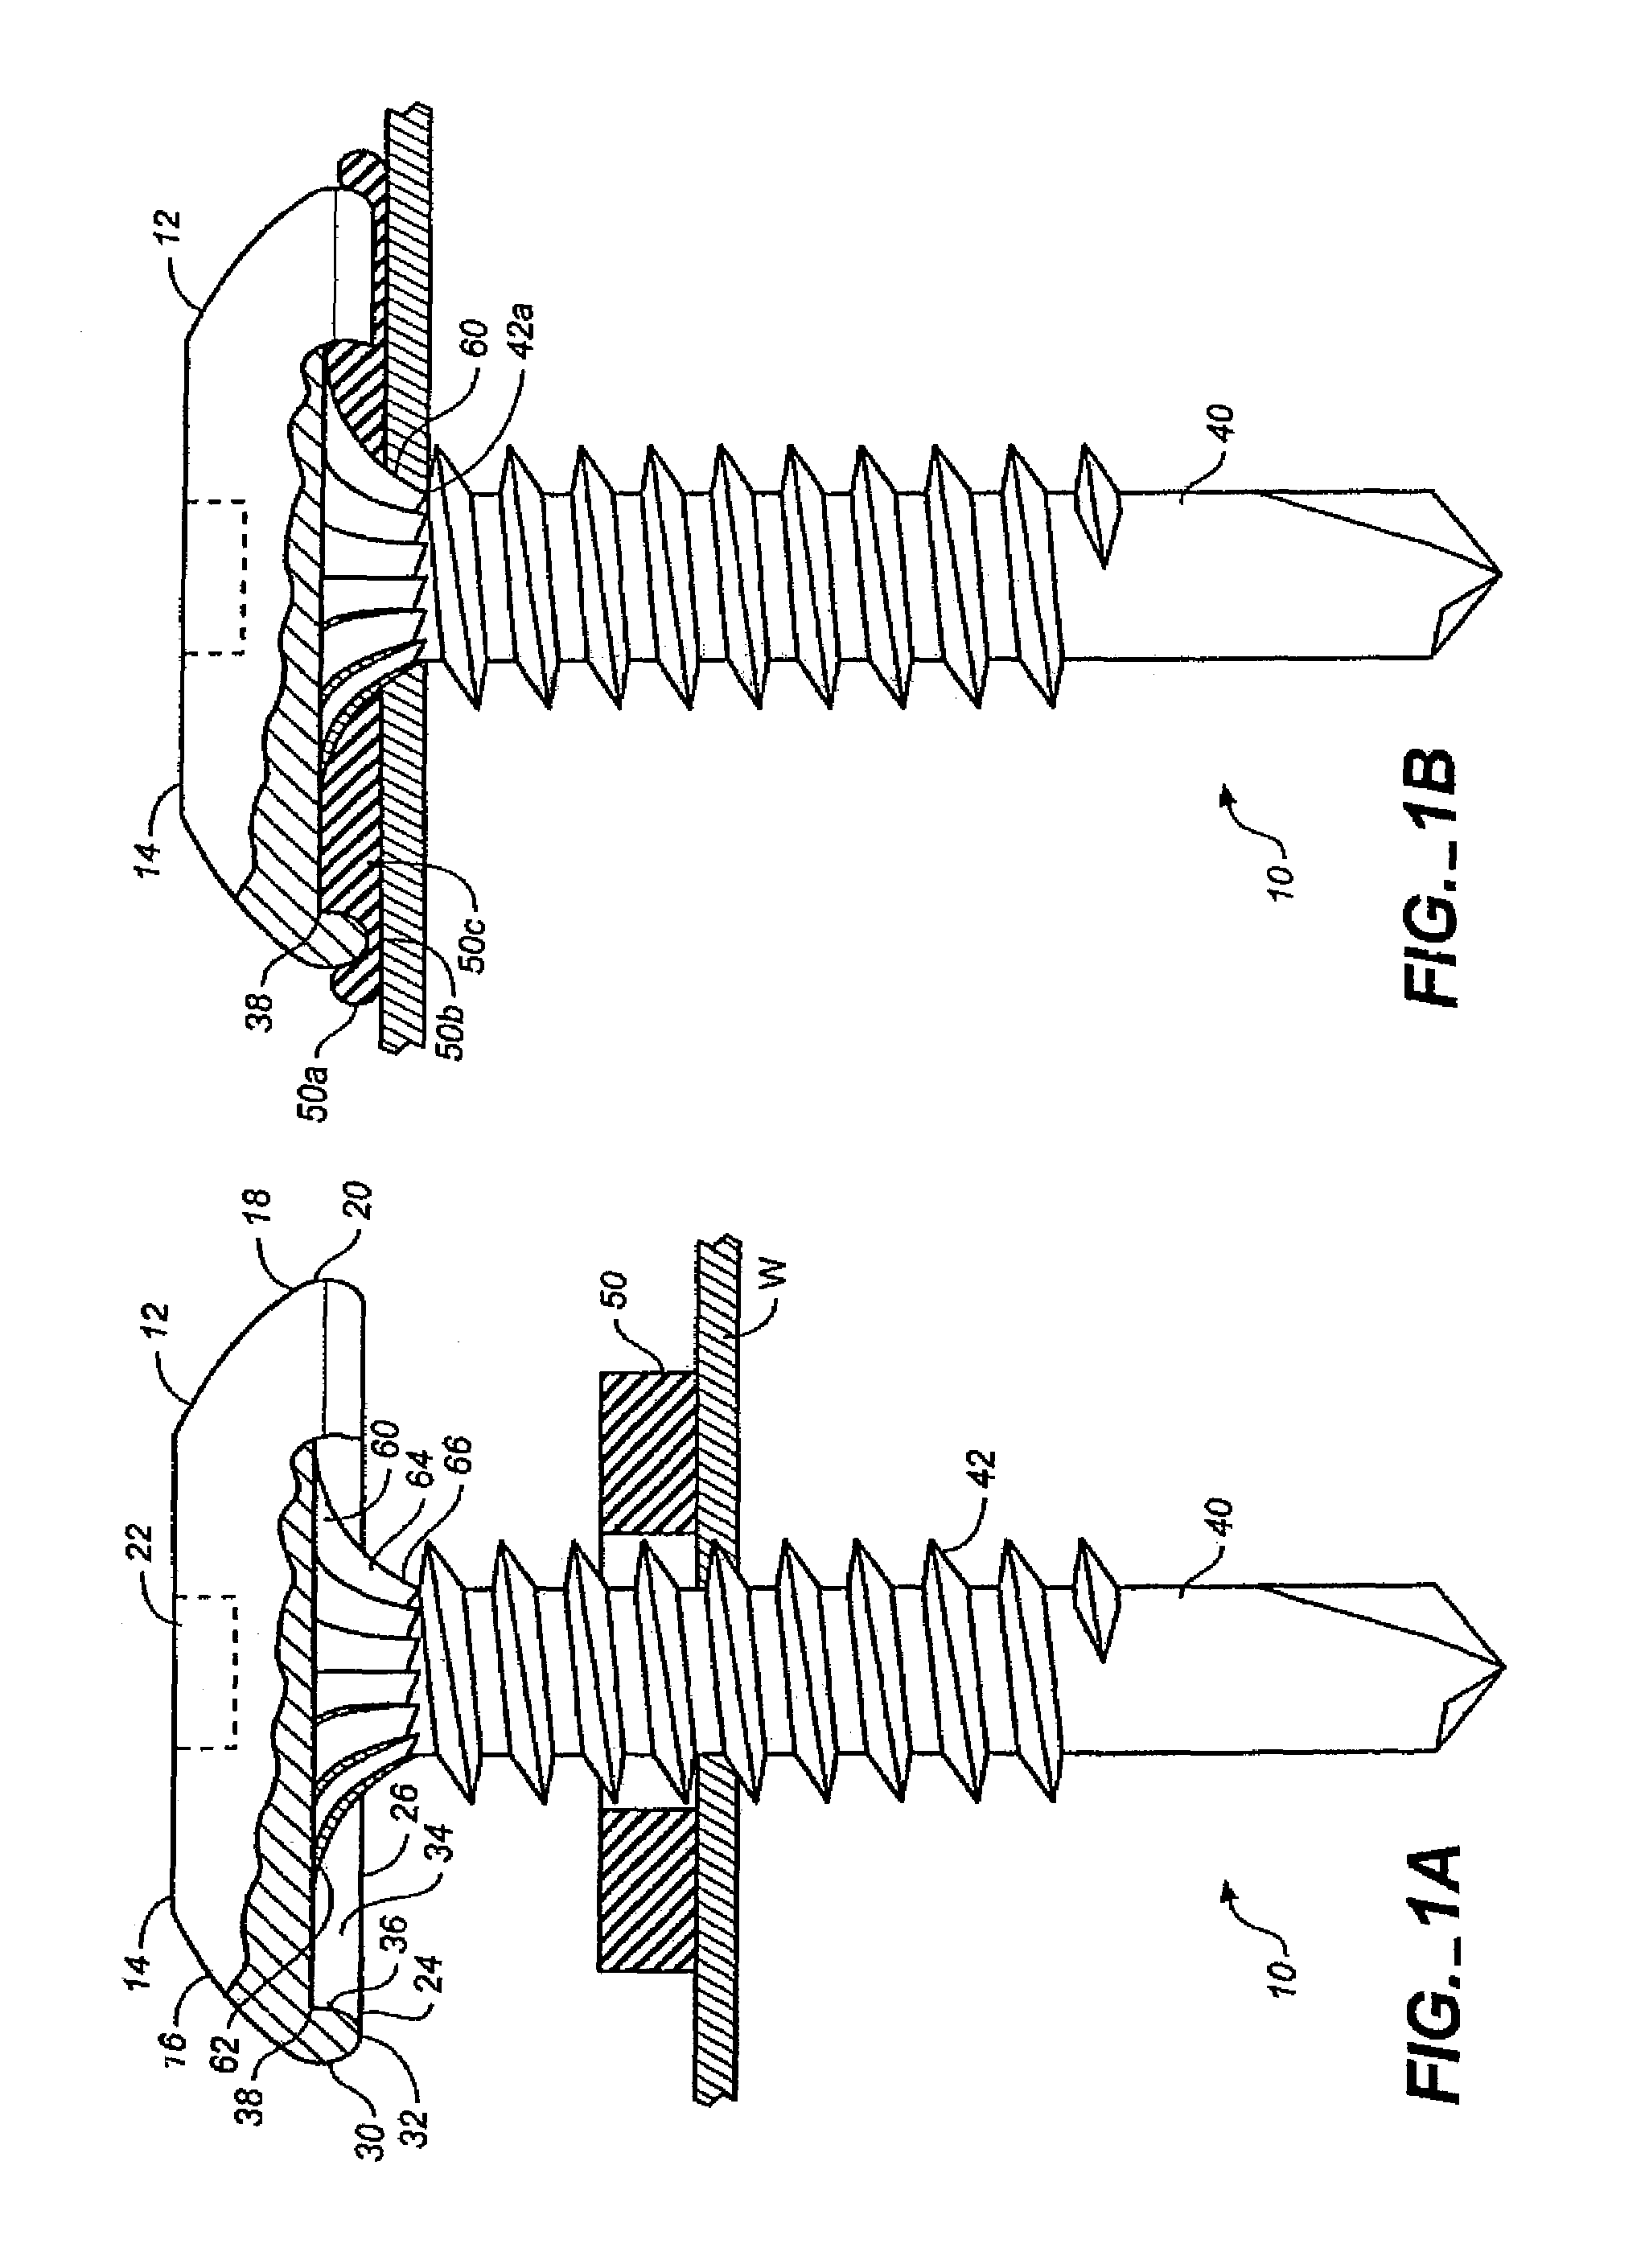 Fastener apparatus for roofing and steel building construction